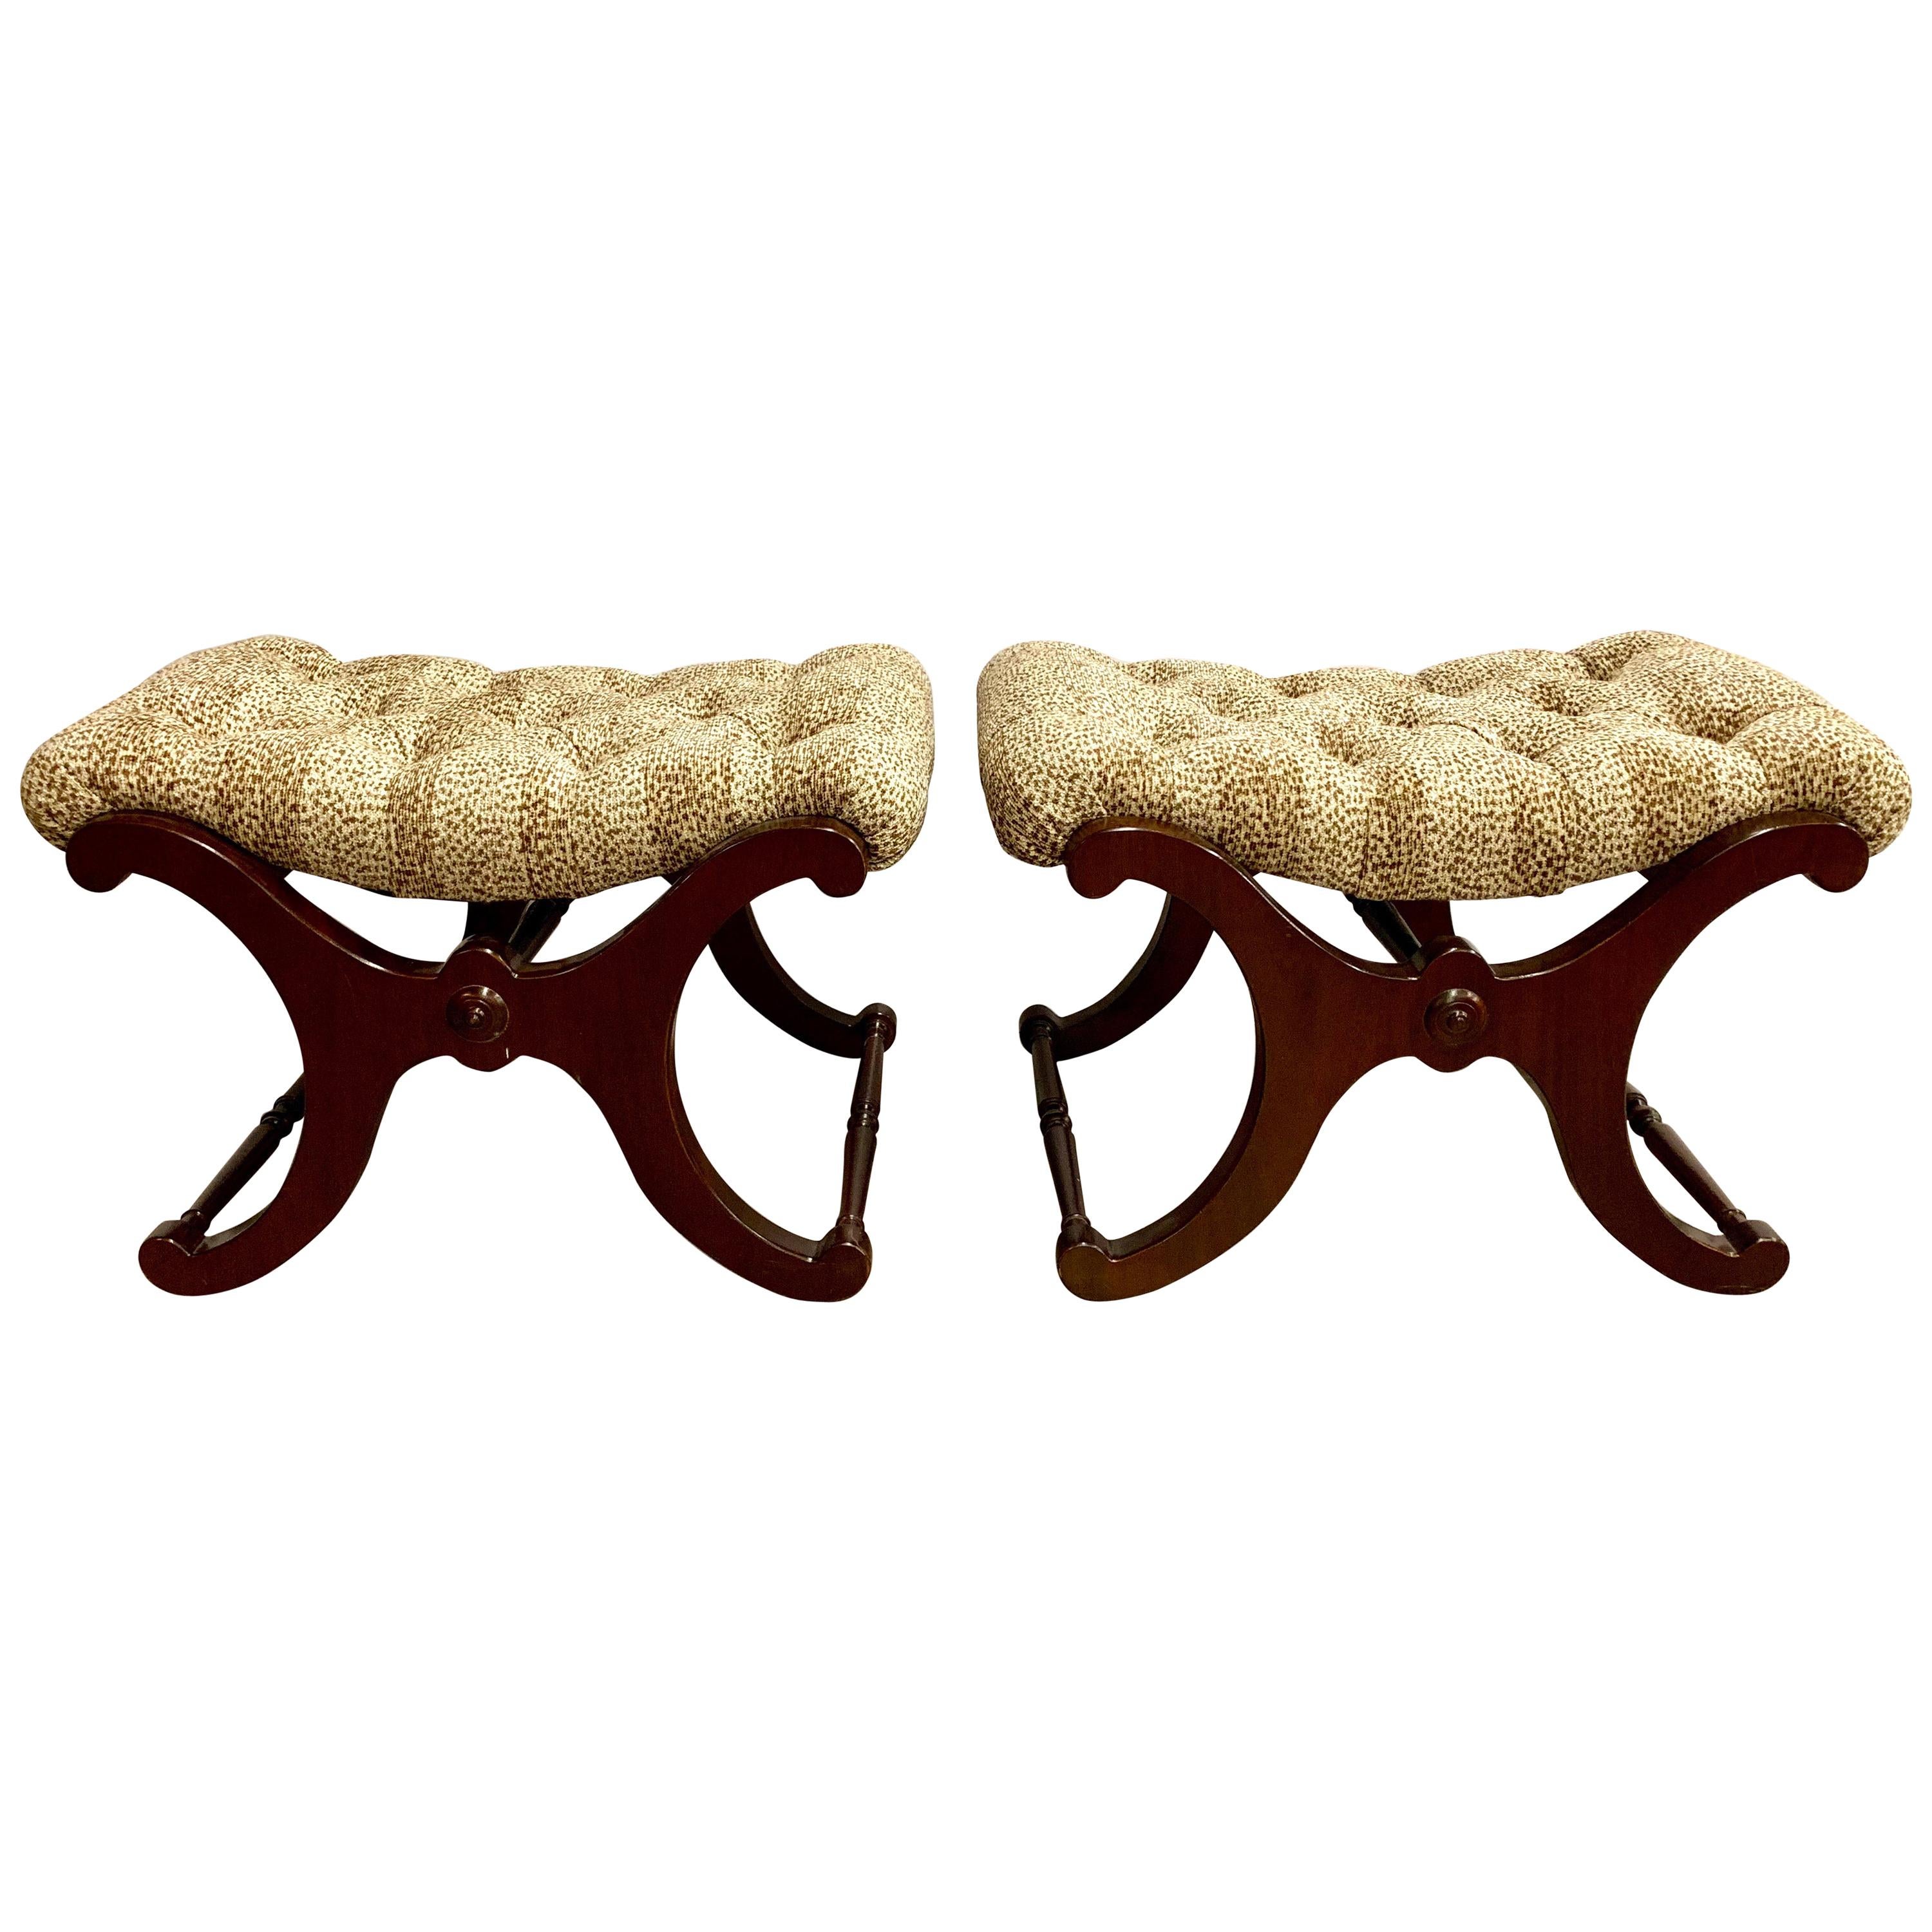 Pair of Tufted Leopard Print X Base Ottomans Benches